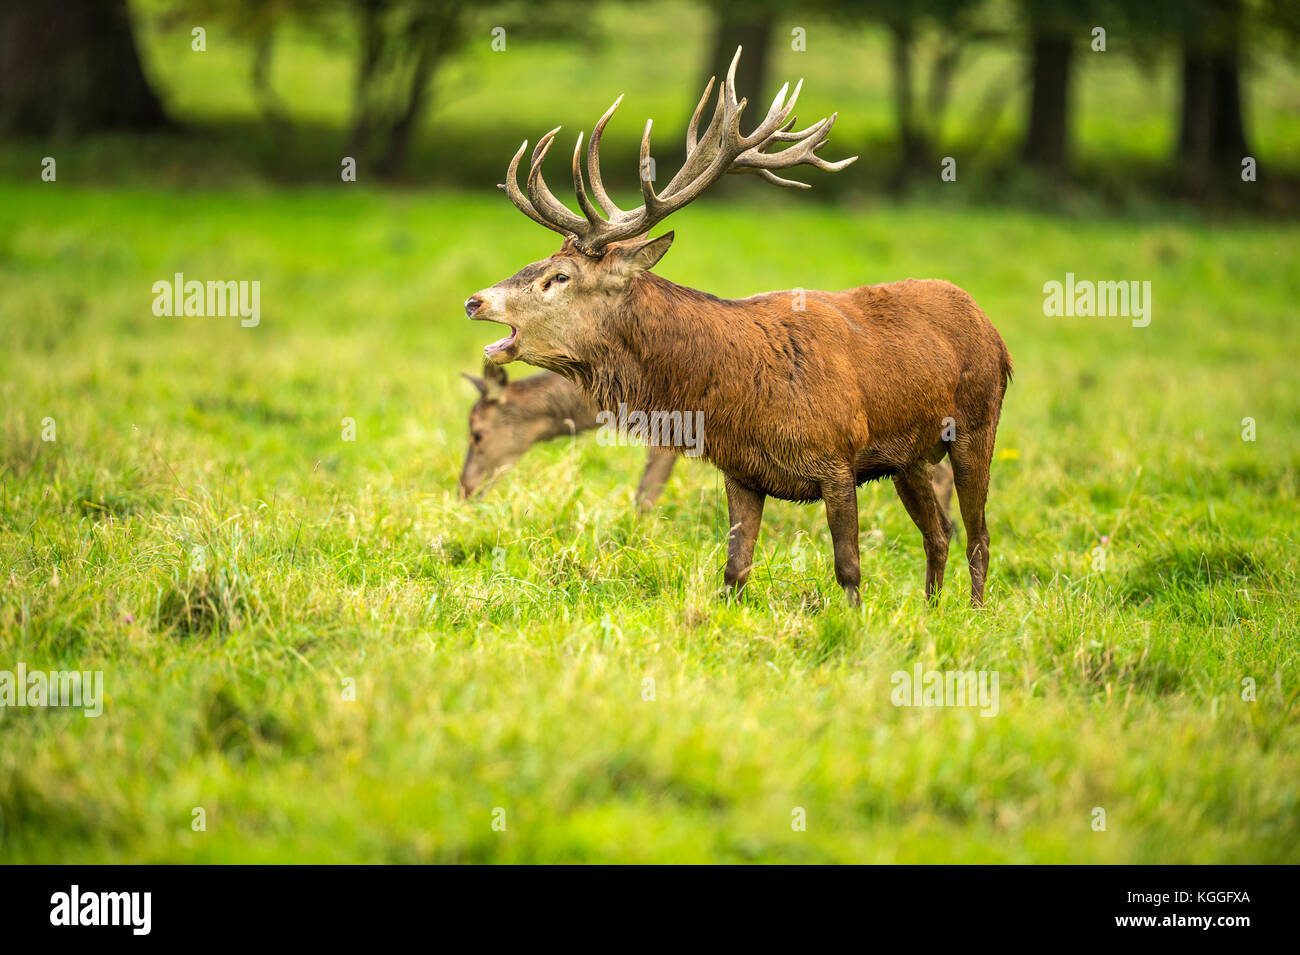 Autumn Red Deer Rut.Image sequence depicting scenes around male Stag's and Female Hind's with young at rest and battling during the annual autumn rut. Stock Photo